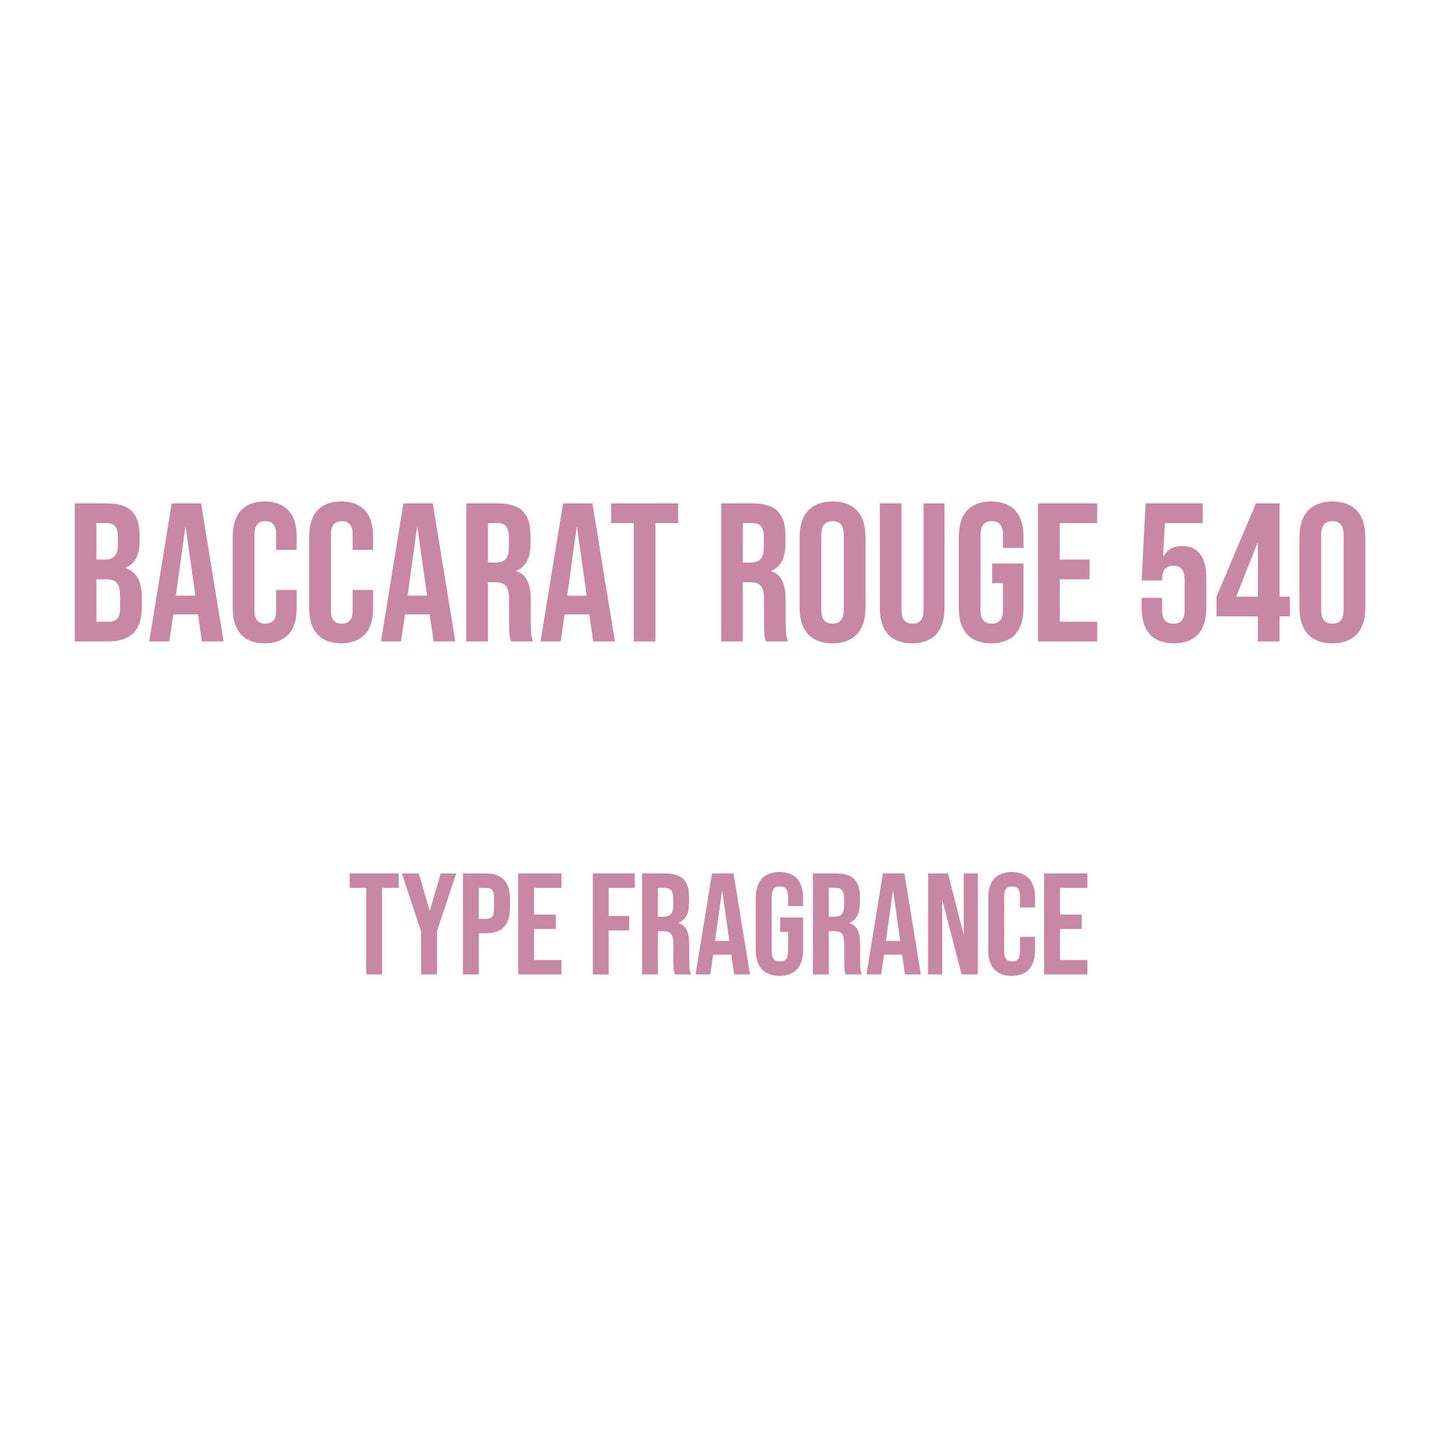 Baccarat Rouge 540 Type Fragrance